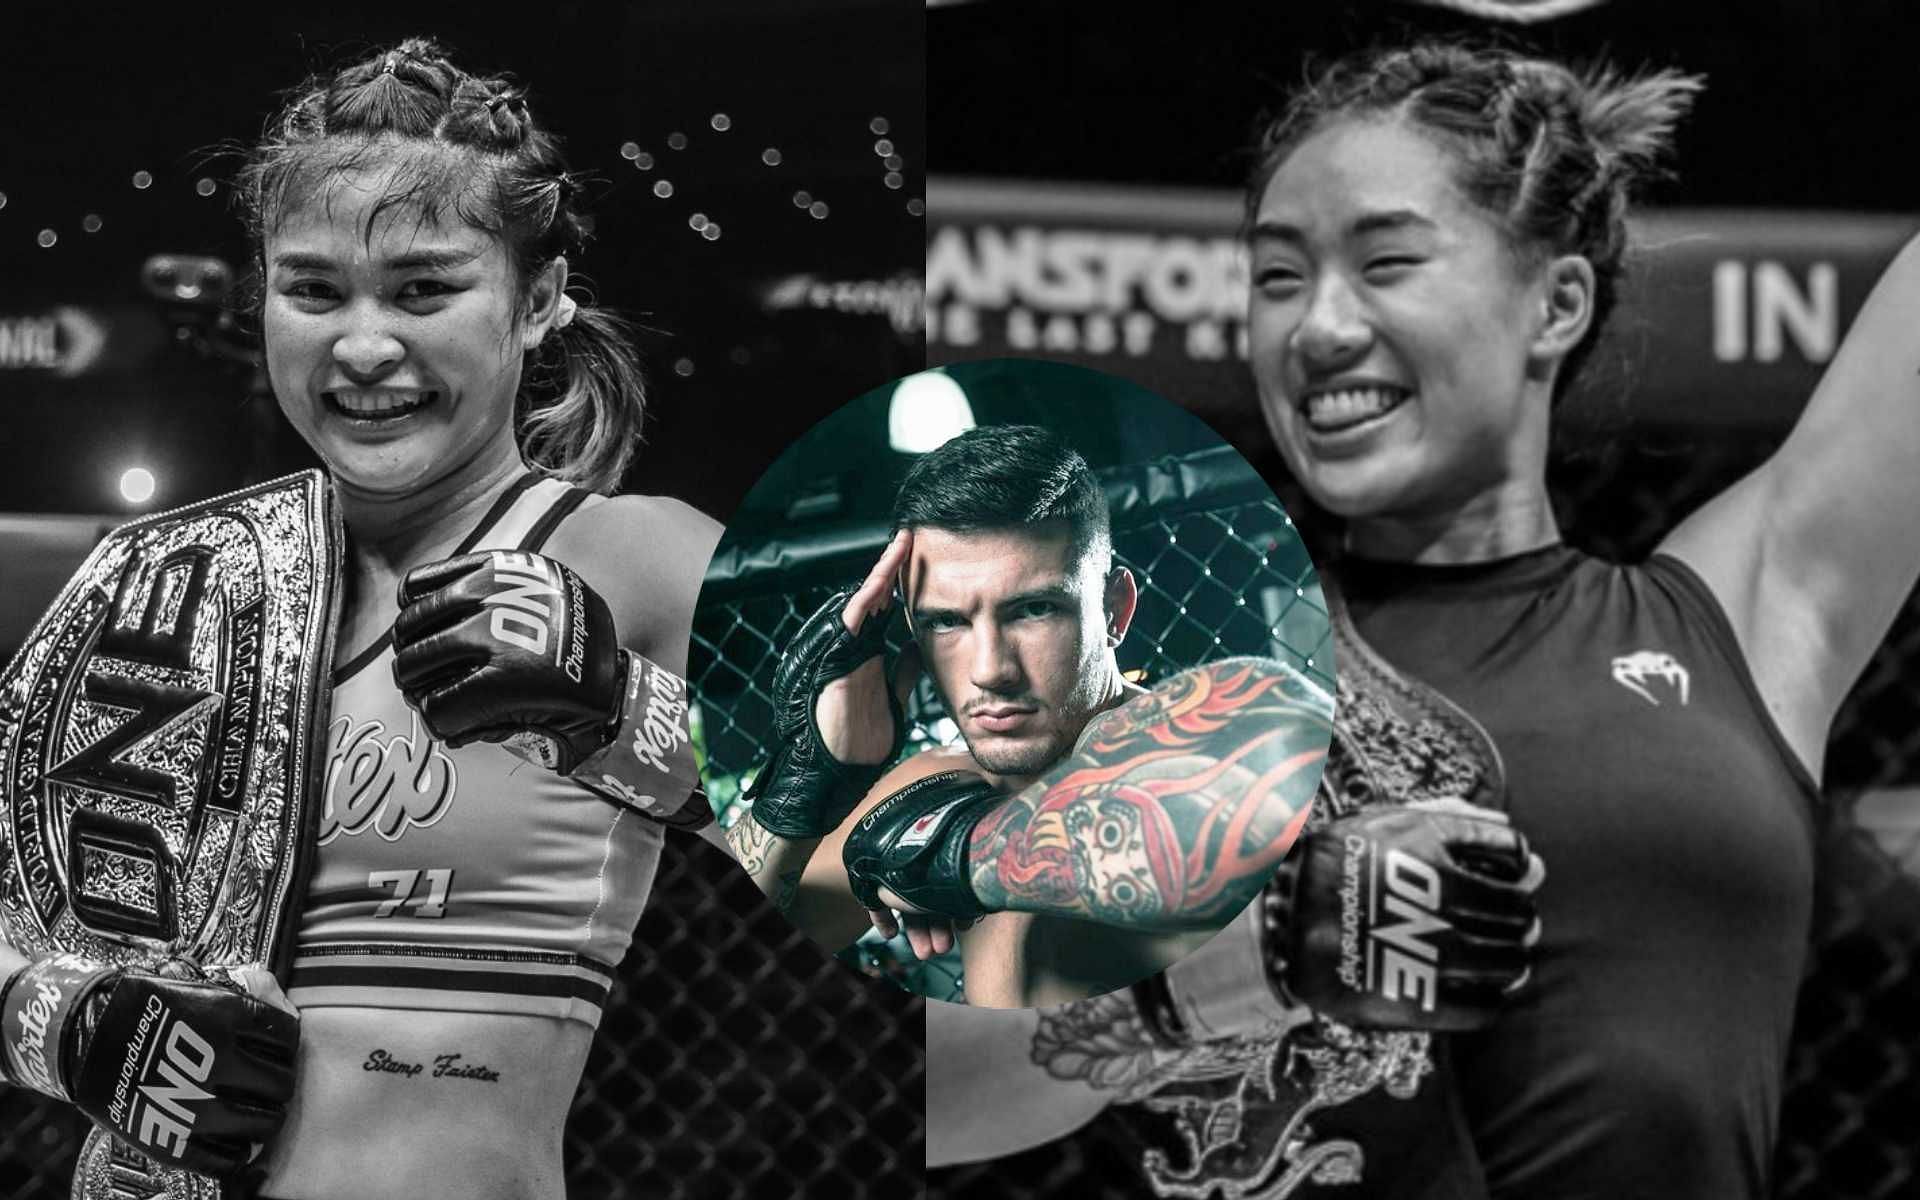 Bruno Pucci (center circle) predicts that his wife Angela Lee (right) will submit Stamp Fairtex (left) in the main event of ONE X. [Photos ONE Championship]